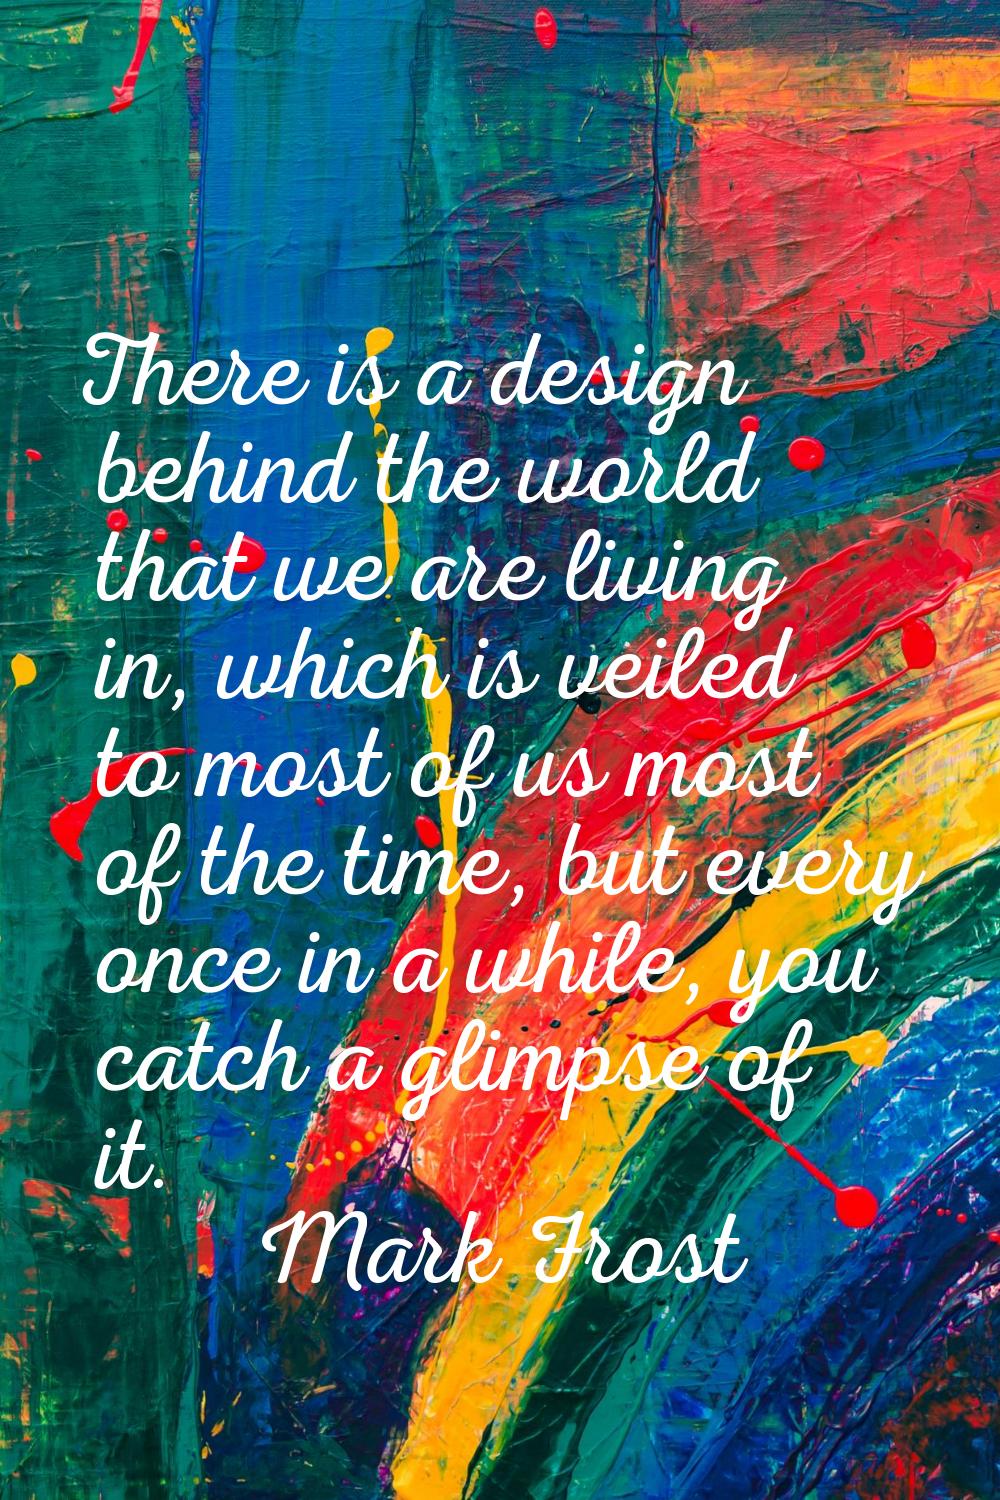 There is a design behind the world that we are living in, which is veiled to most of us most of the